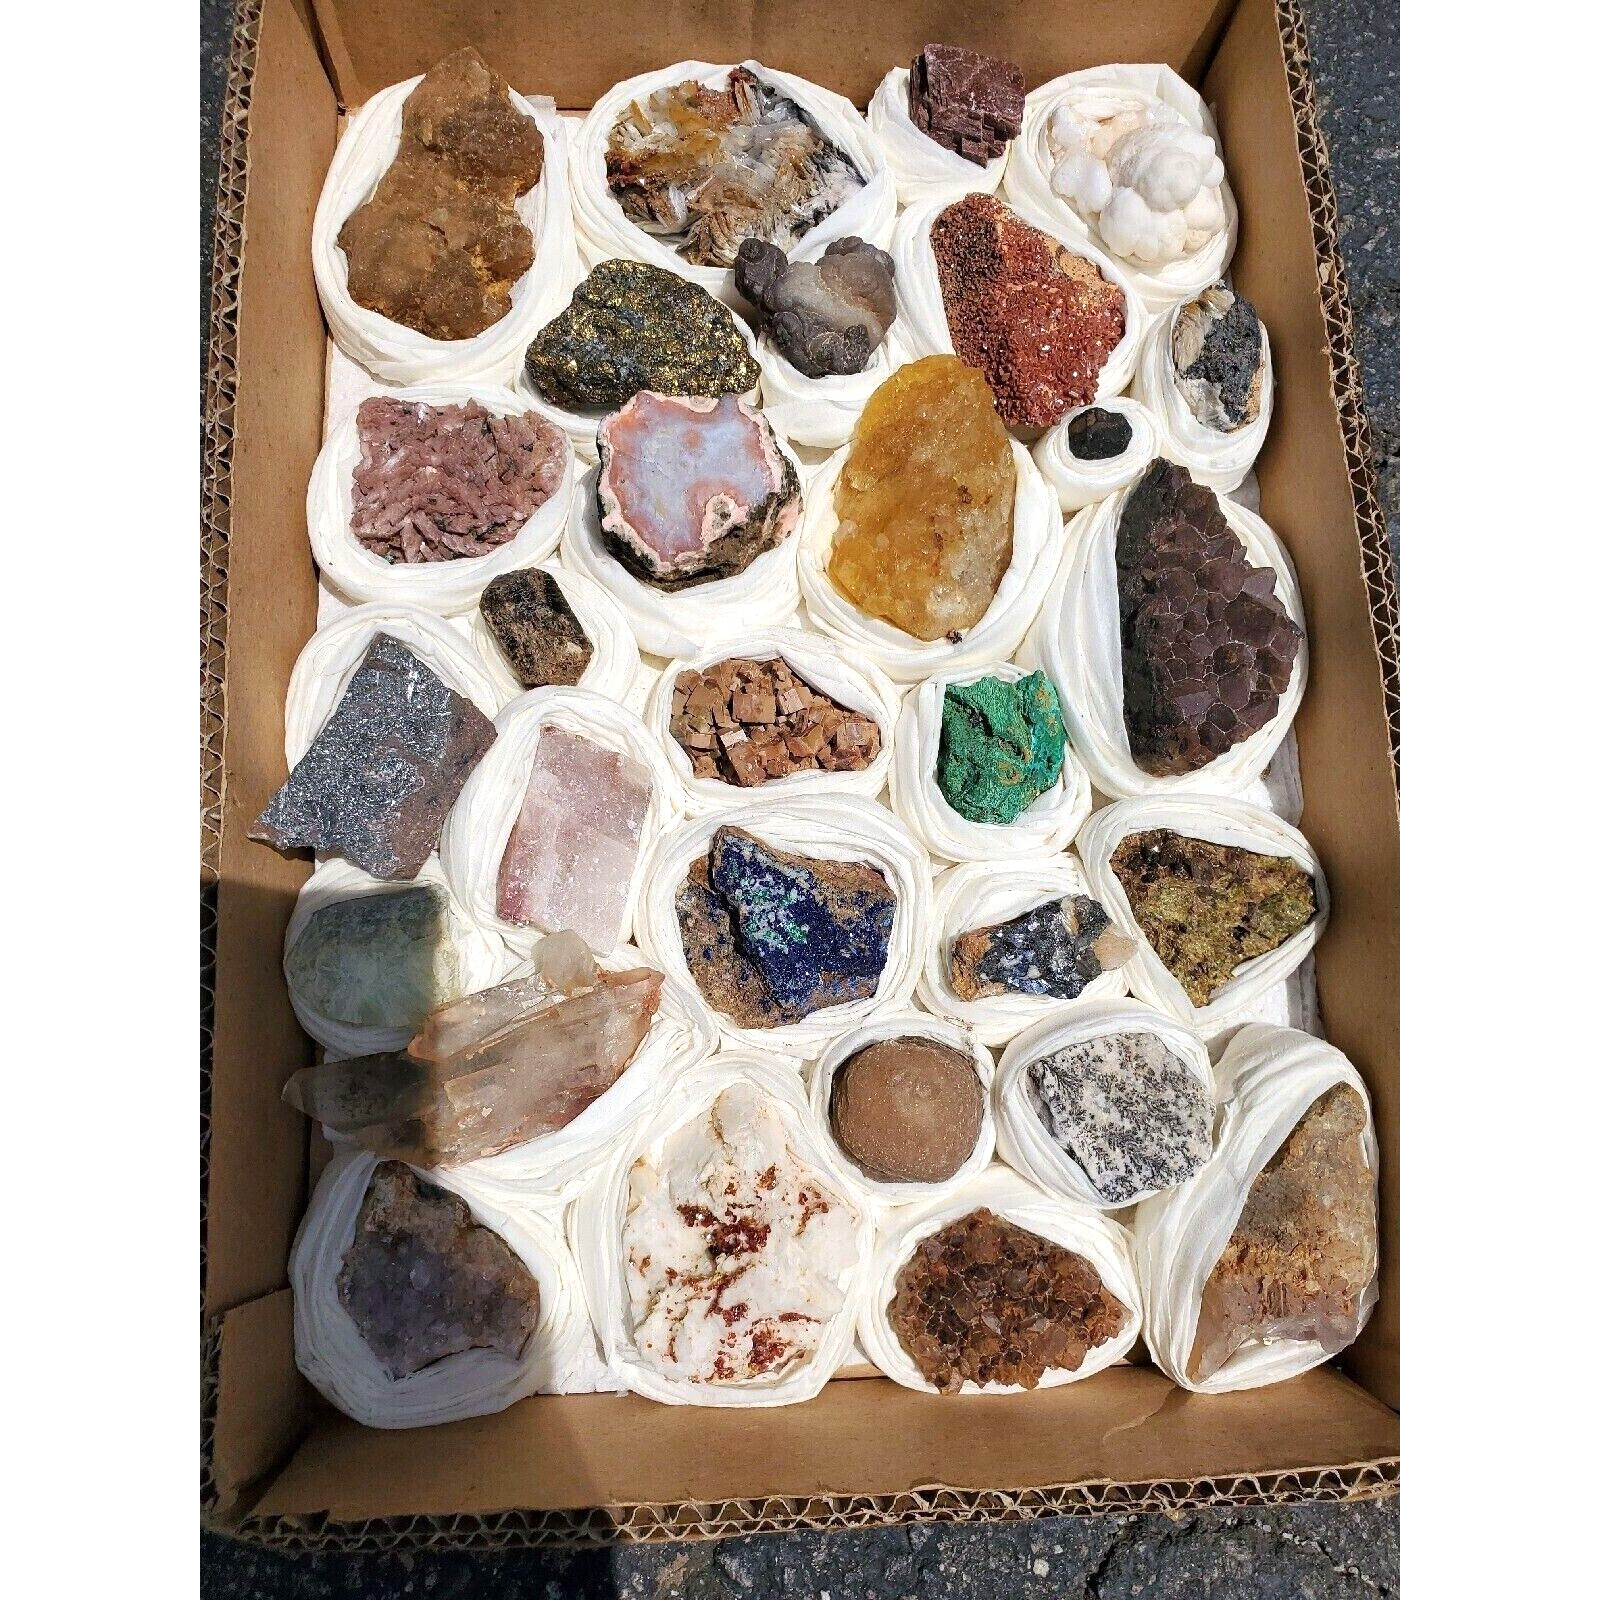 A mineral Flat of 29 specimens of high quality from Morrocco 4 Lb #37